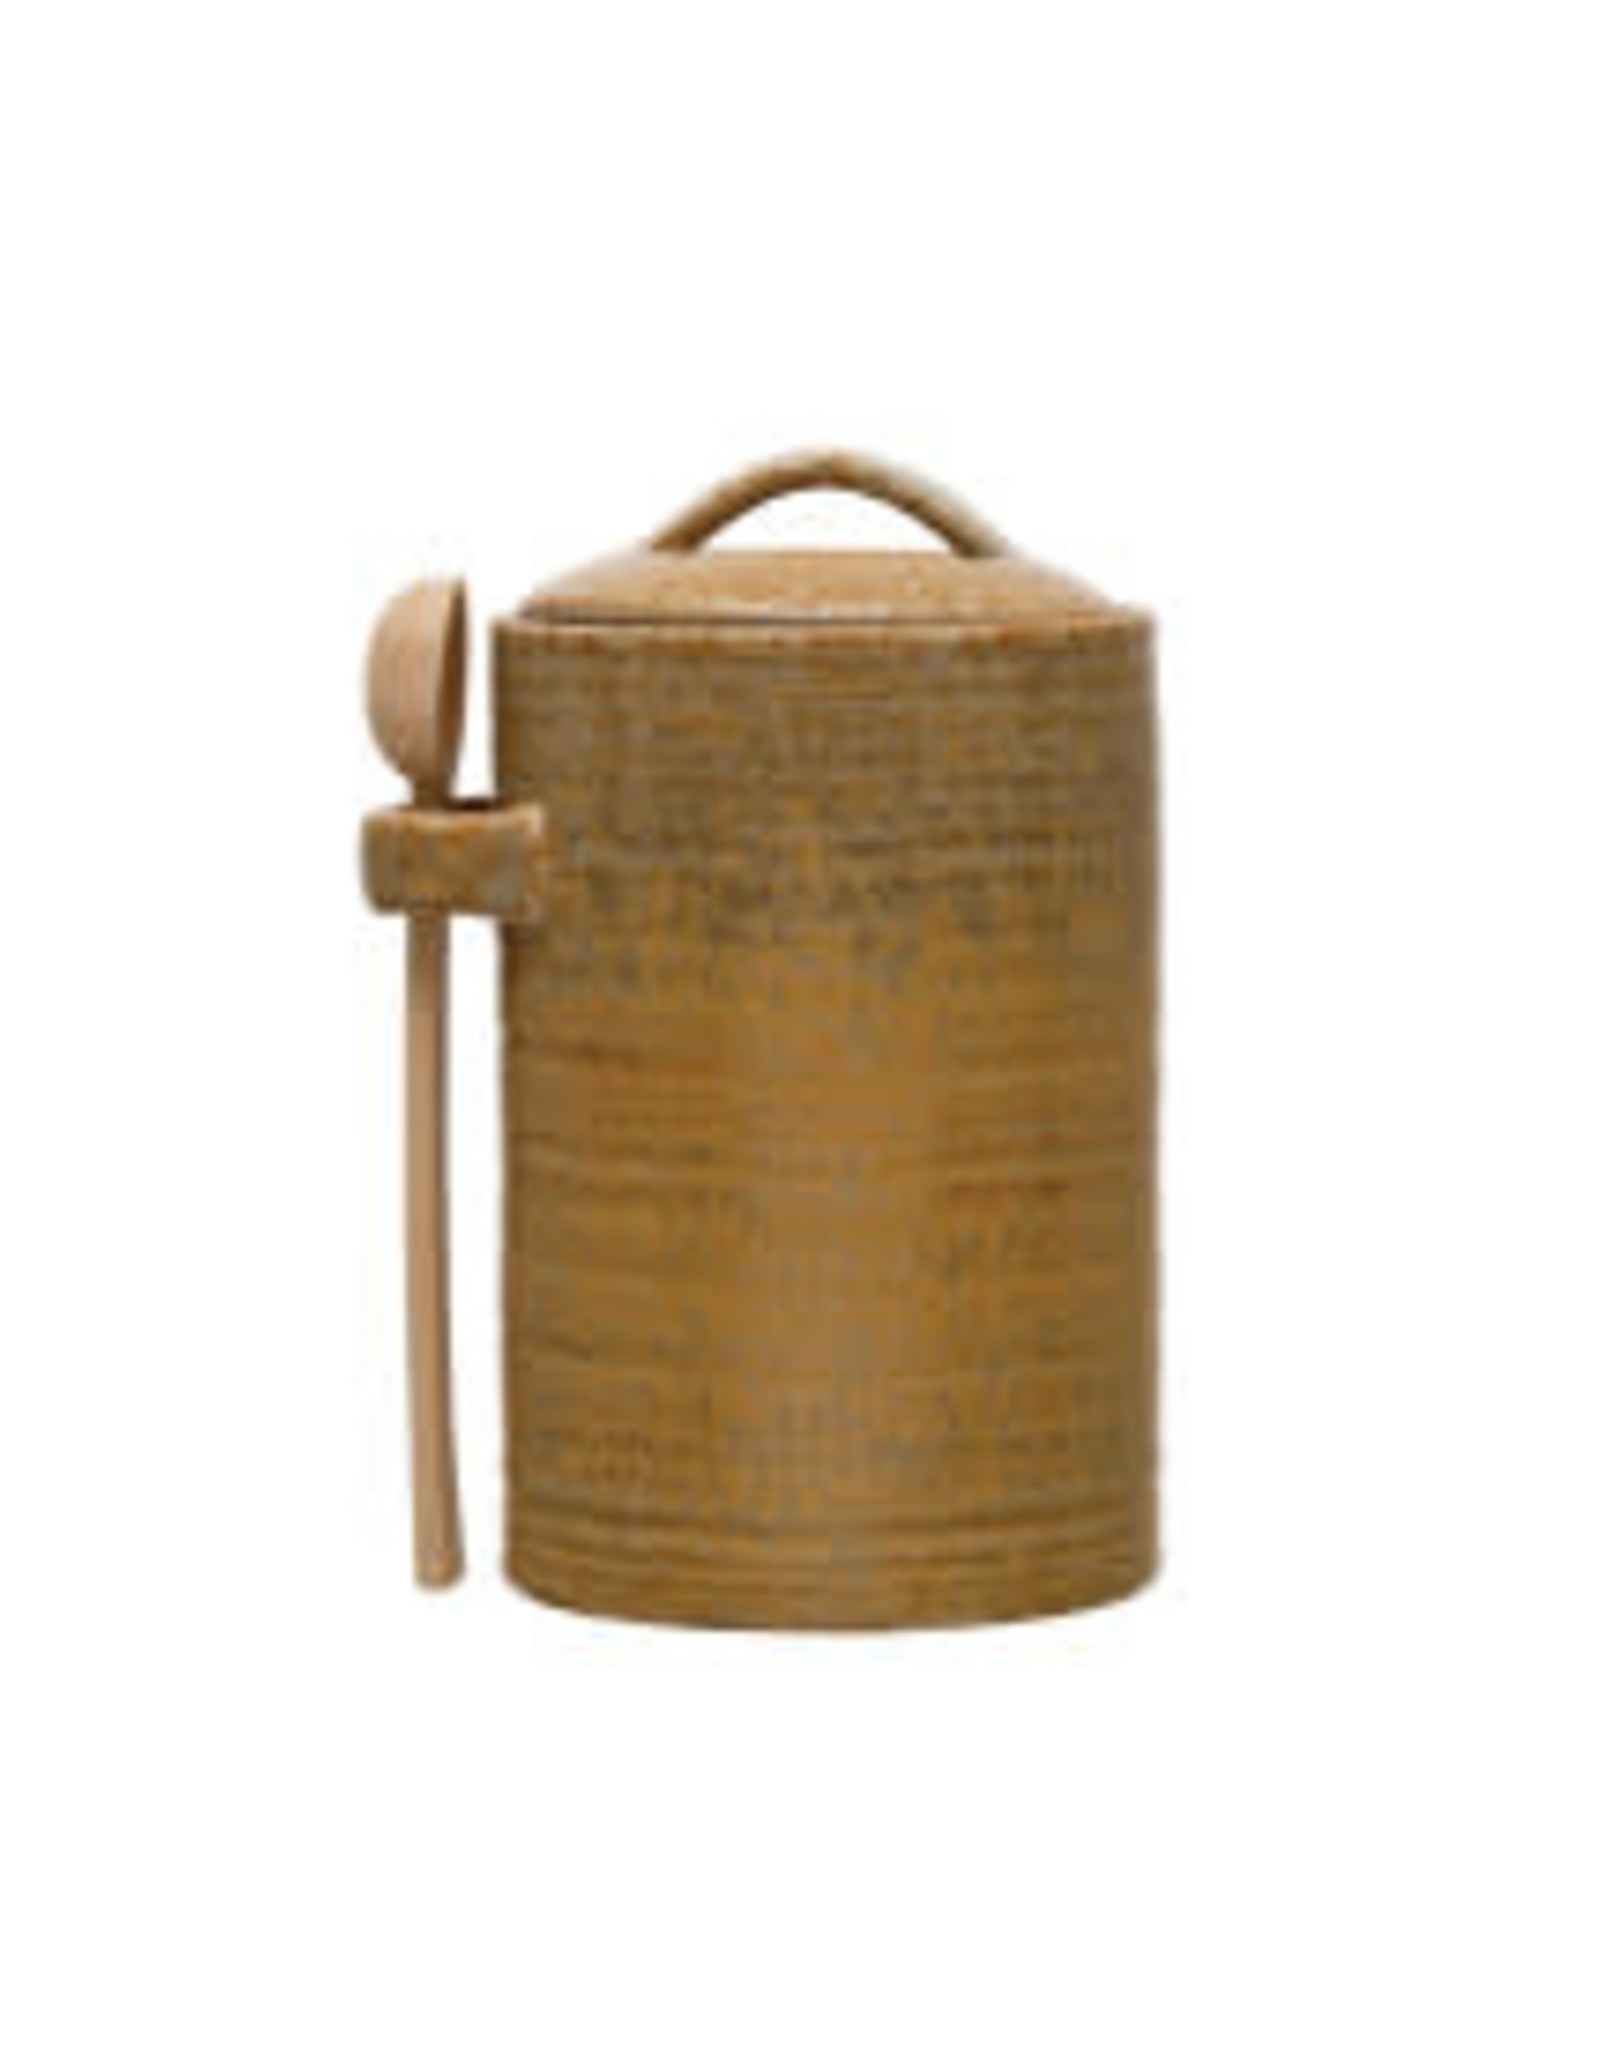 Stoneware Canister with Spoon H7.25"